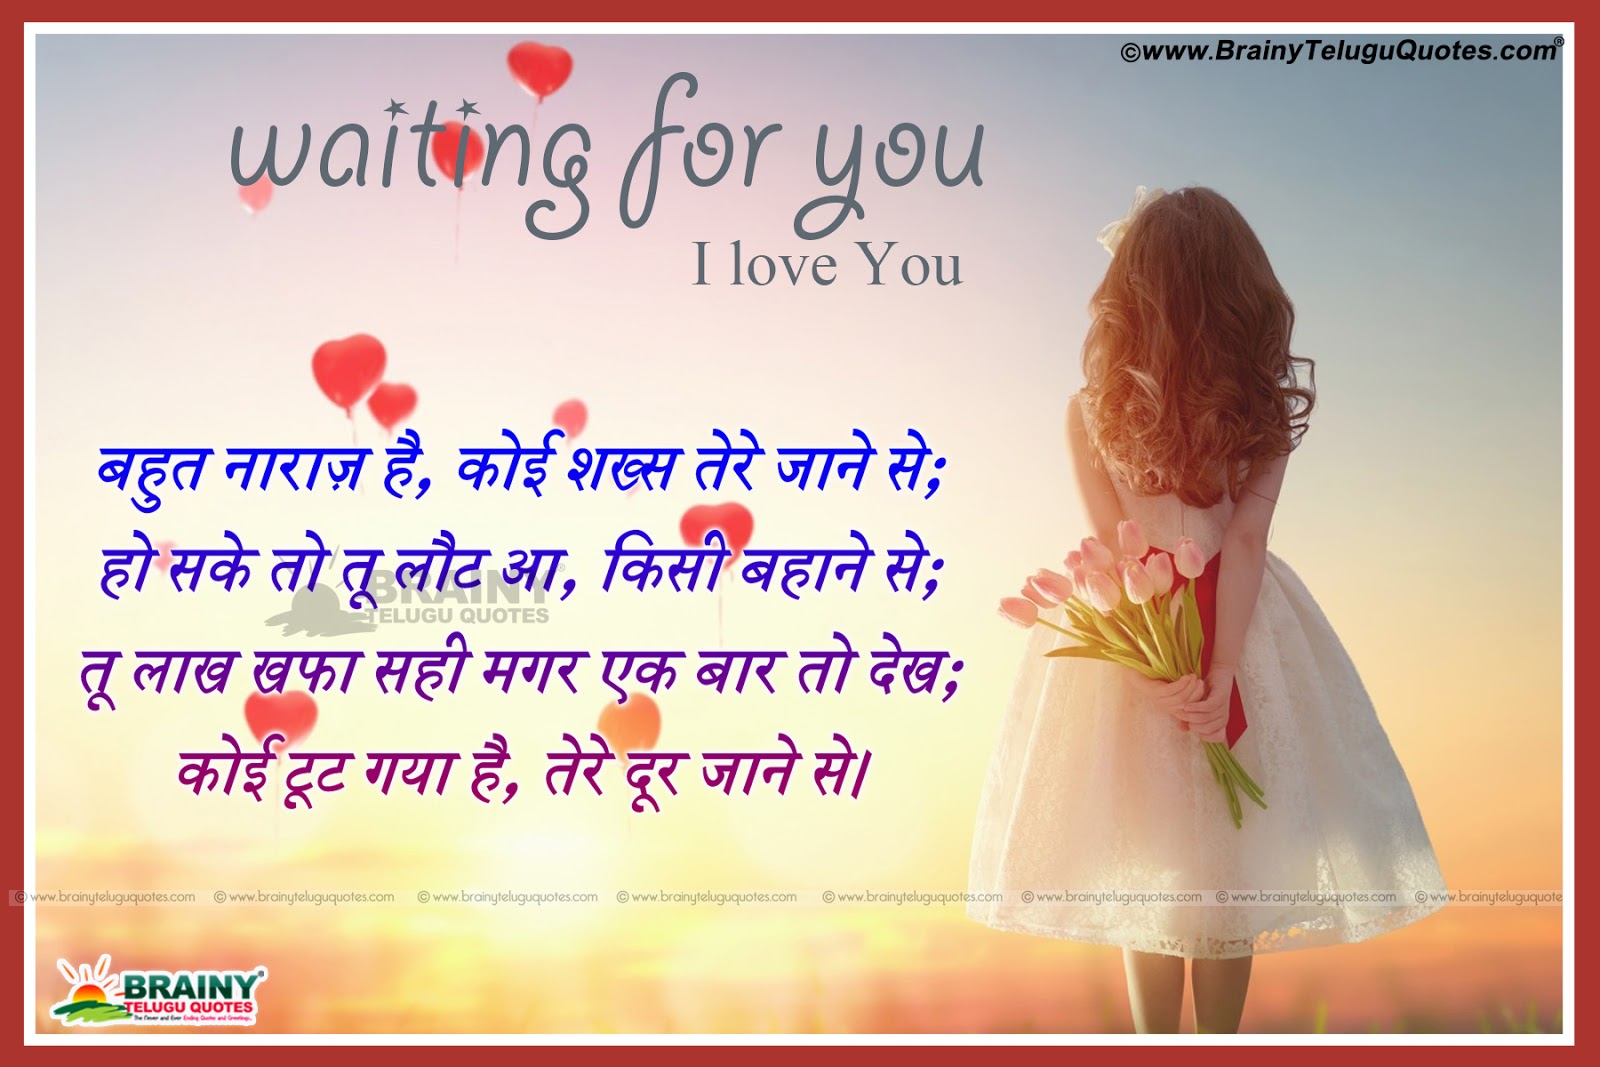 Best Top Love Quotes in Hindi Images backgrounds hd alone girl wallpapers | BrainyTeluguQuotes ...